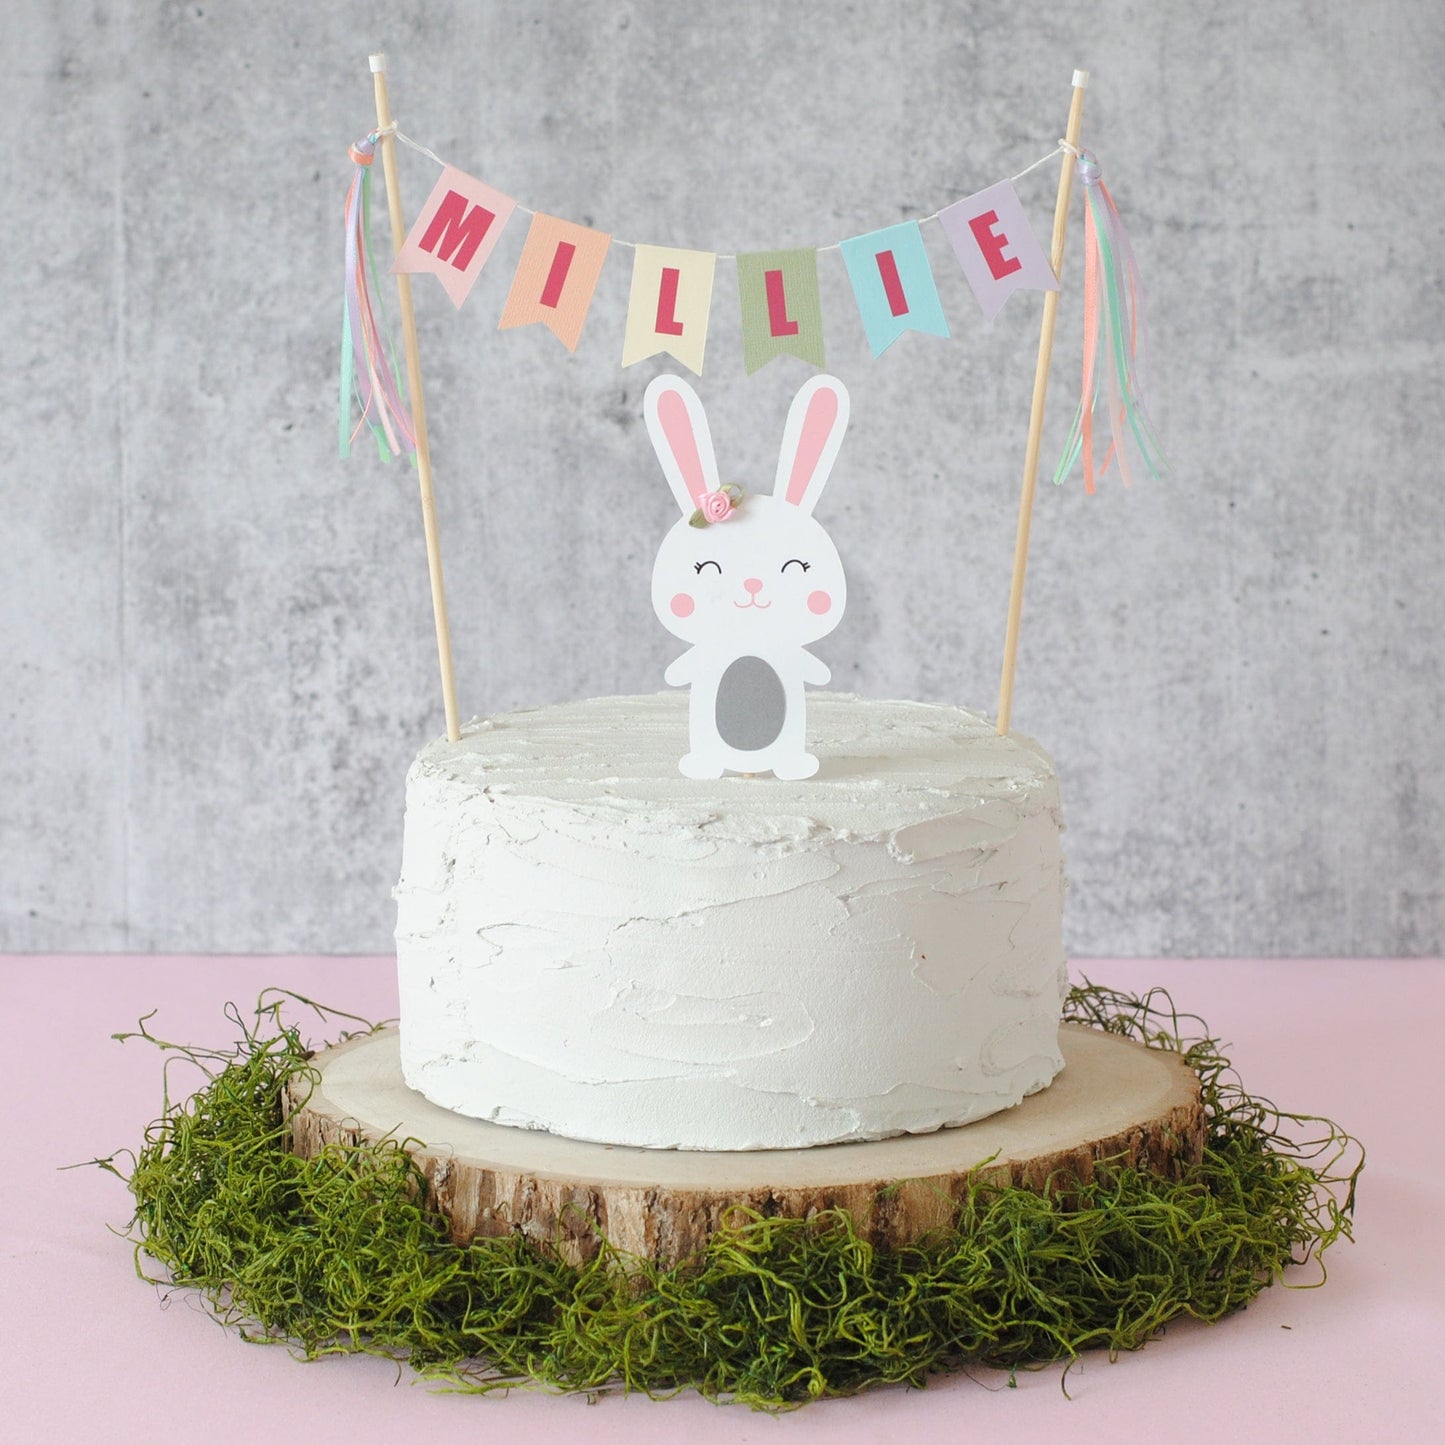 12 Easy Easter Bunny Cake Ideas - How to Make Bunny-Shaped Cakes